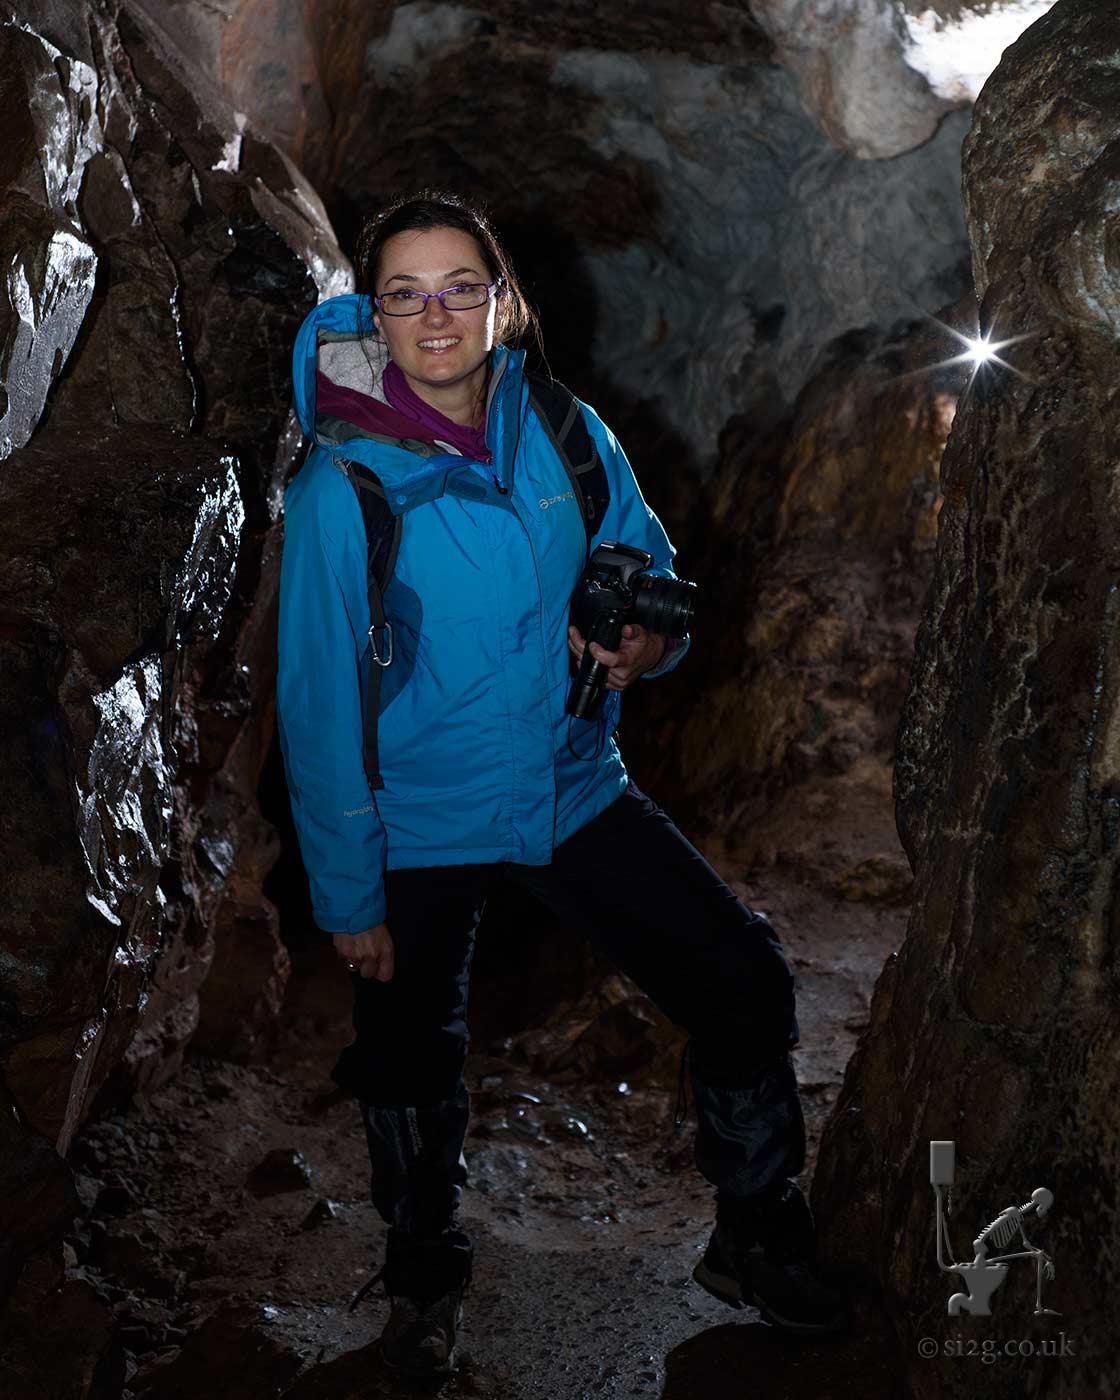 Going Underground - Daria exploring a network of caves underneath the Welsh countryside.